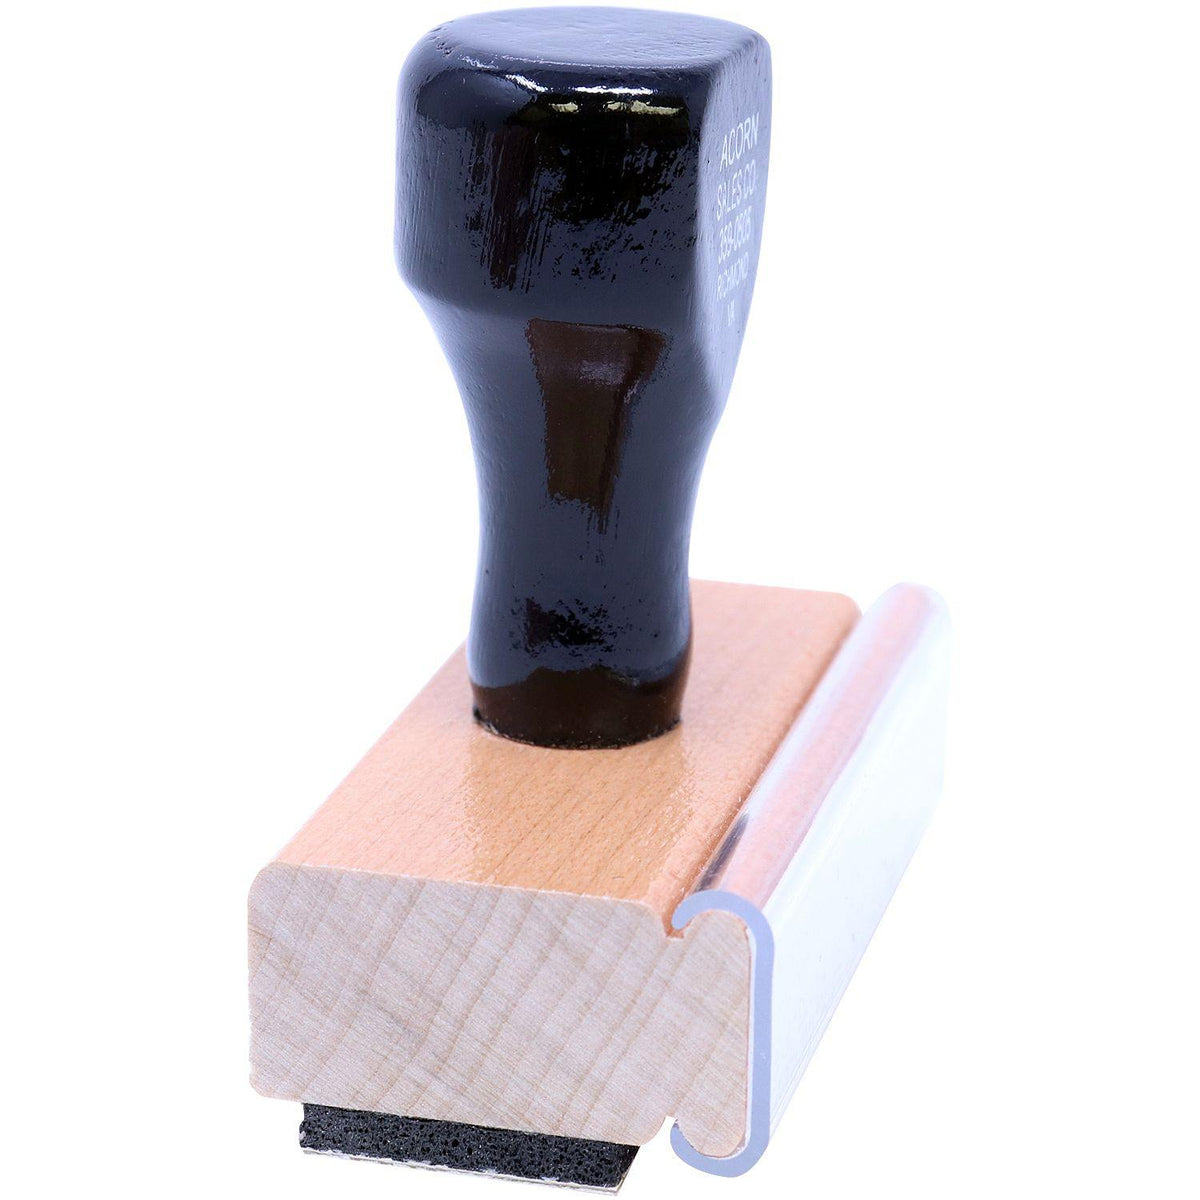 Side View of Urgent Rubber Stamp at an Angle